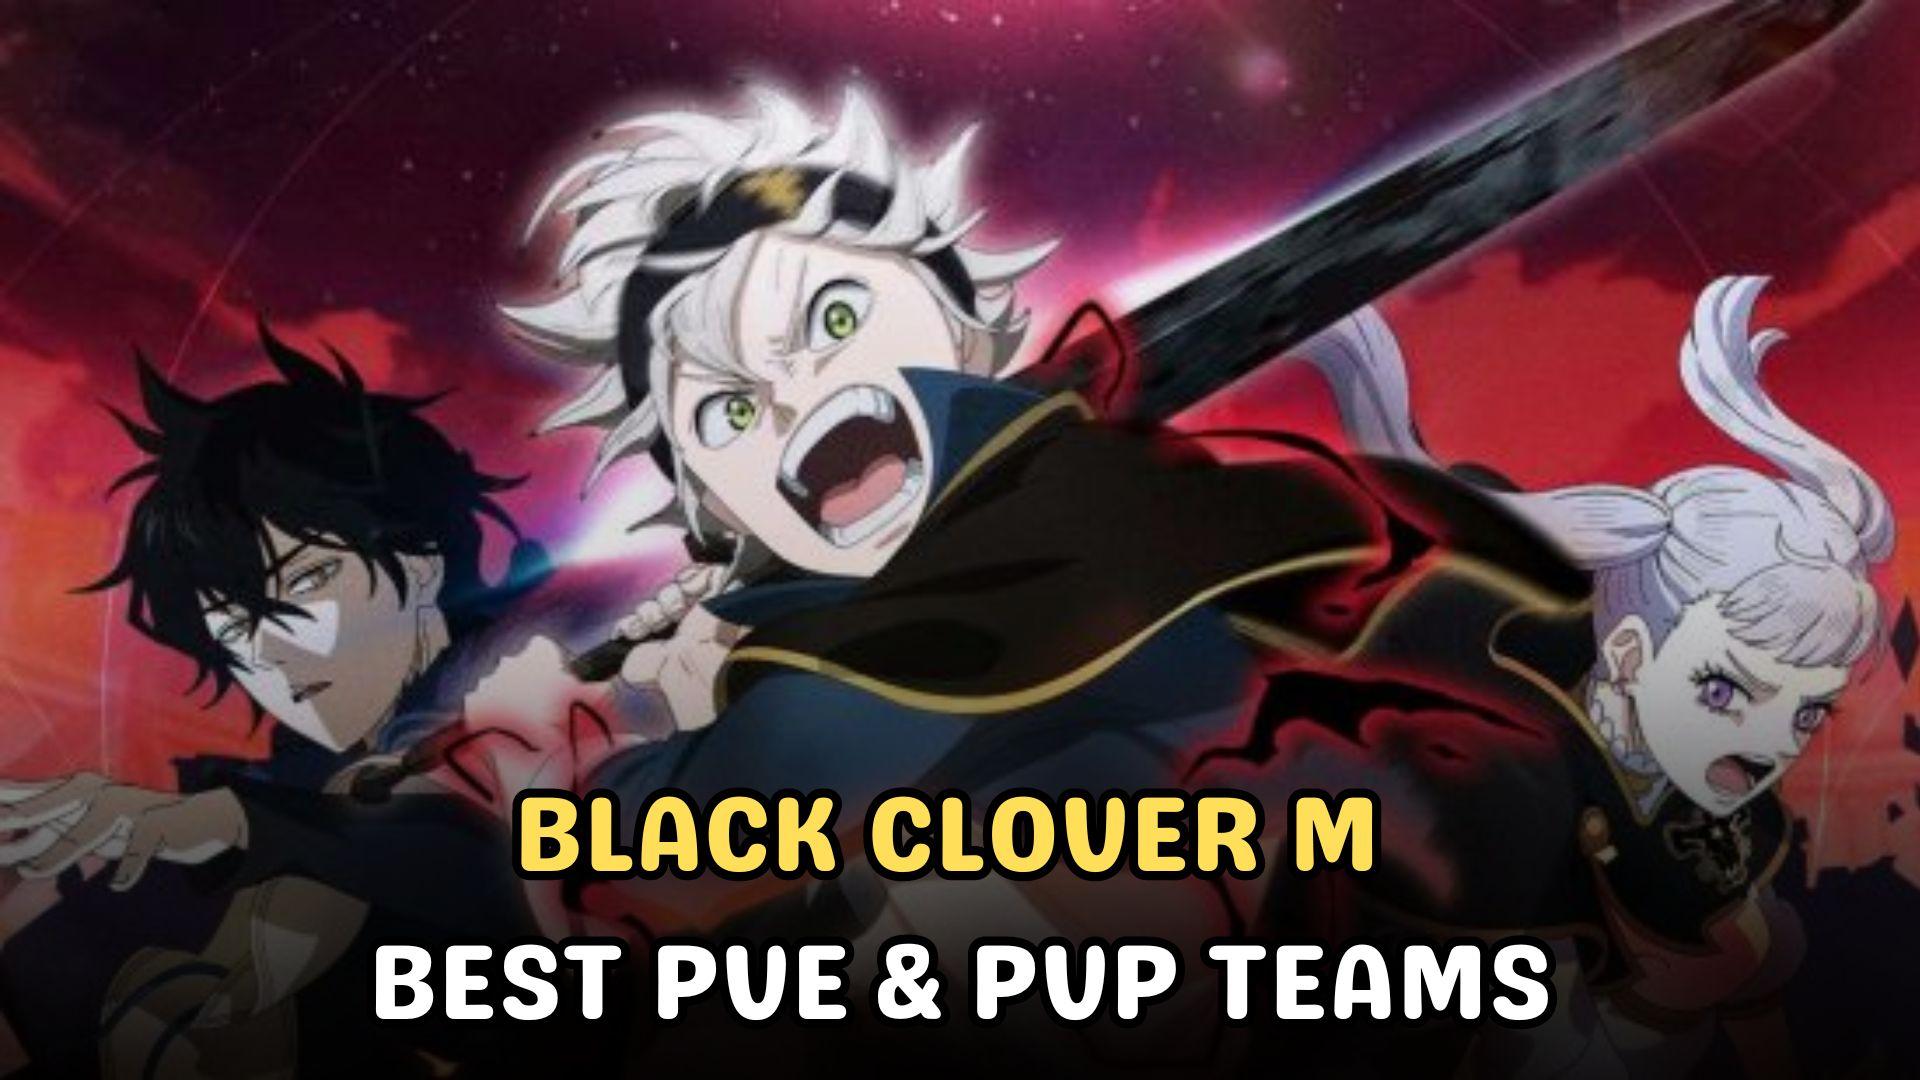 Black Clover Mobile Tier List and Reroll Guide for Best Characters